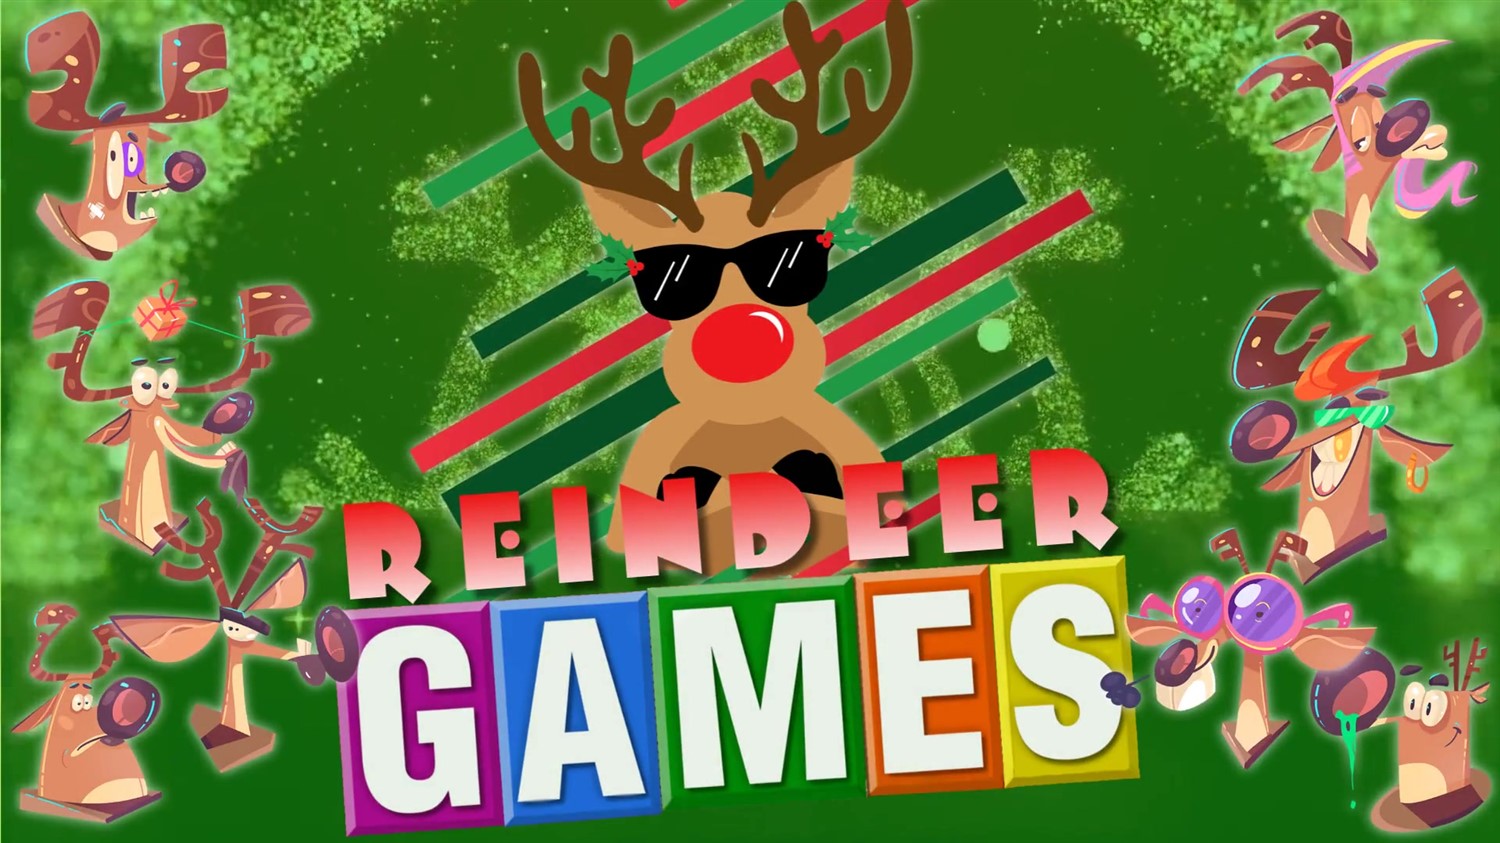 REINDEER GAMES Fun Holiday Game Show for All Ages on Dec 03, 19:00@FFX Theatre - Pick a seat, Buy tickets and Get information on Family Fun Xperience tickets.ffxshow.org